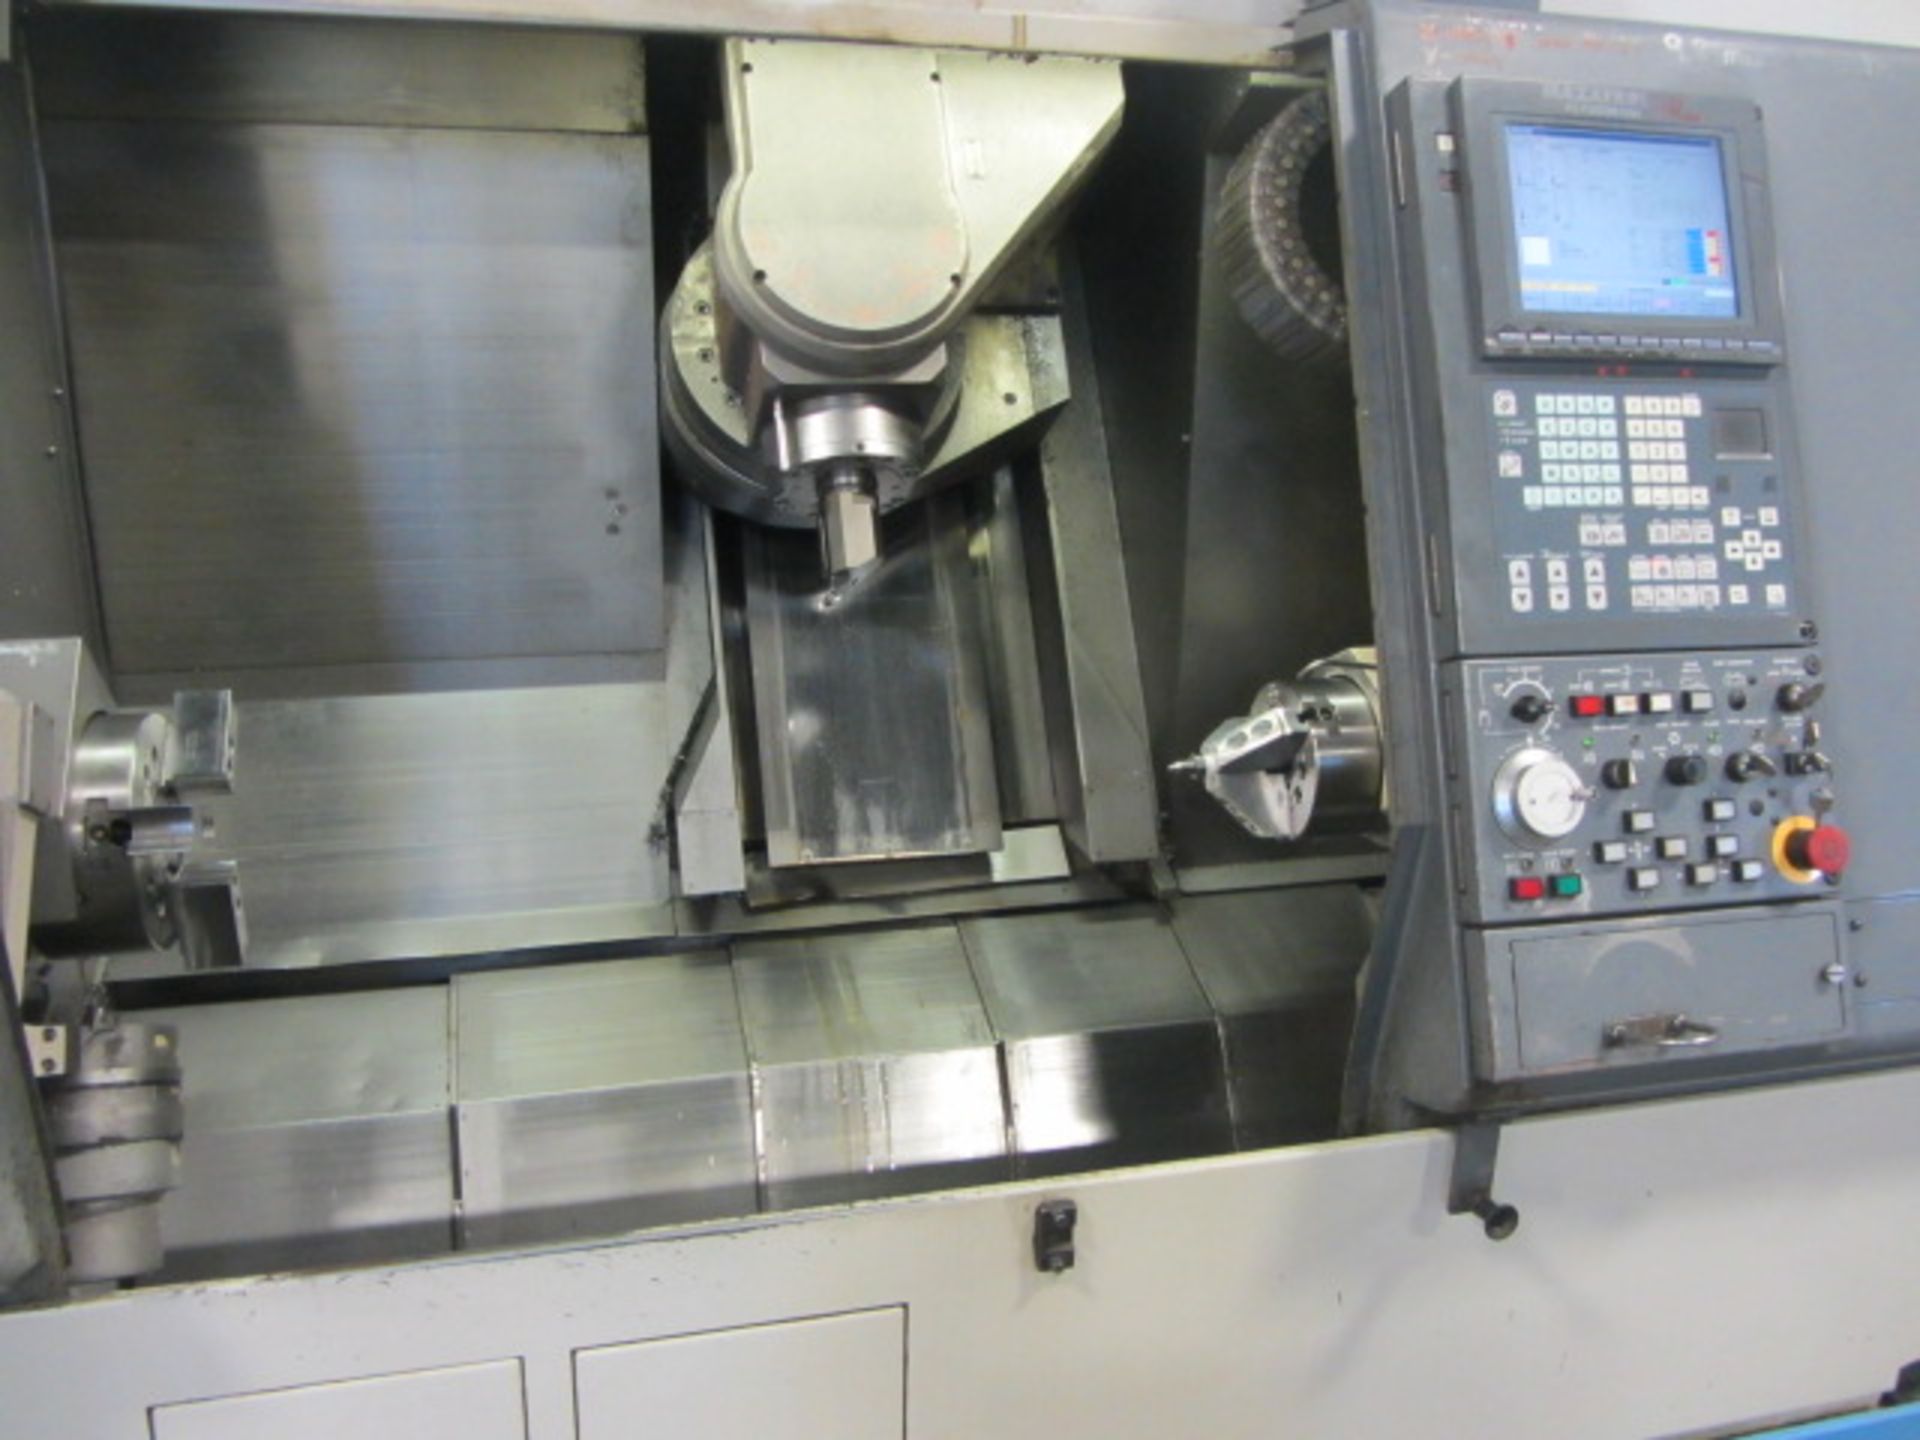 Mazak Integrex 200SY CNC Turning Center with Sub-Spindle, Milling & Y-Axis, 8'' Chuck on Main - Image 3 of 9